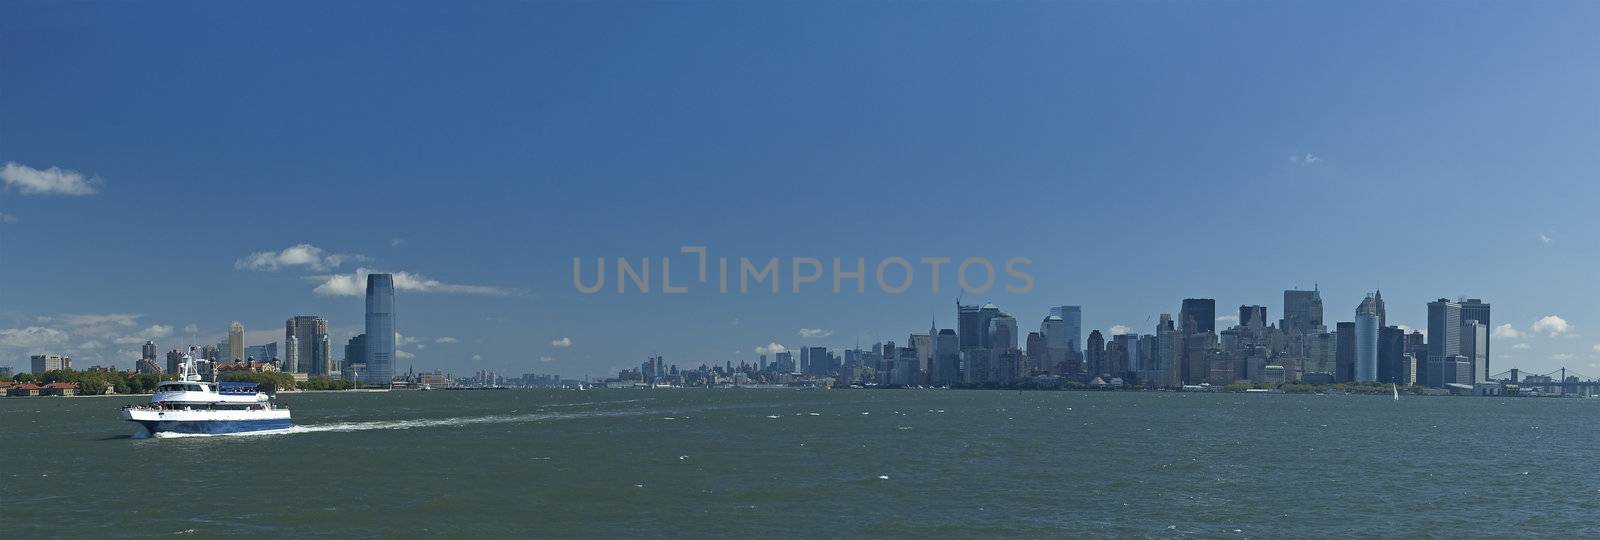 white boat going from nyc to statue of liberty, panorama photo